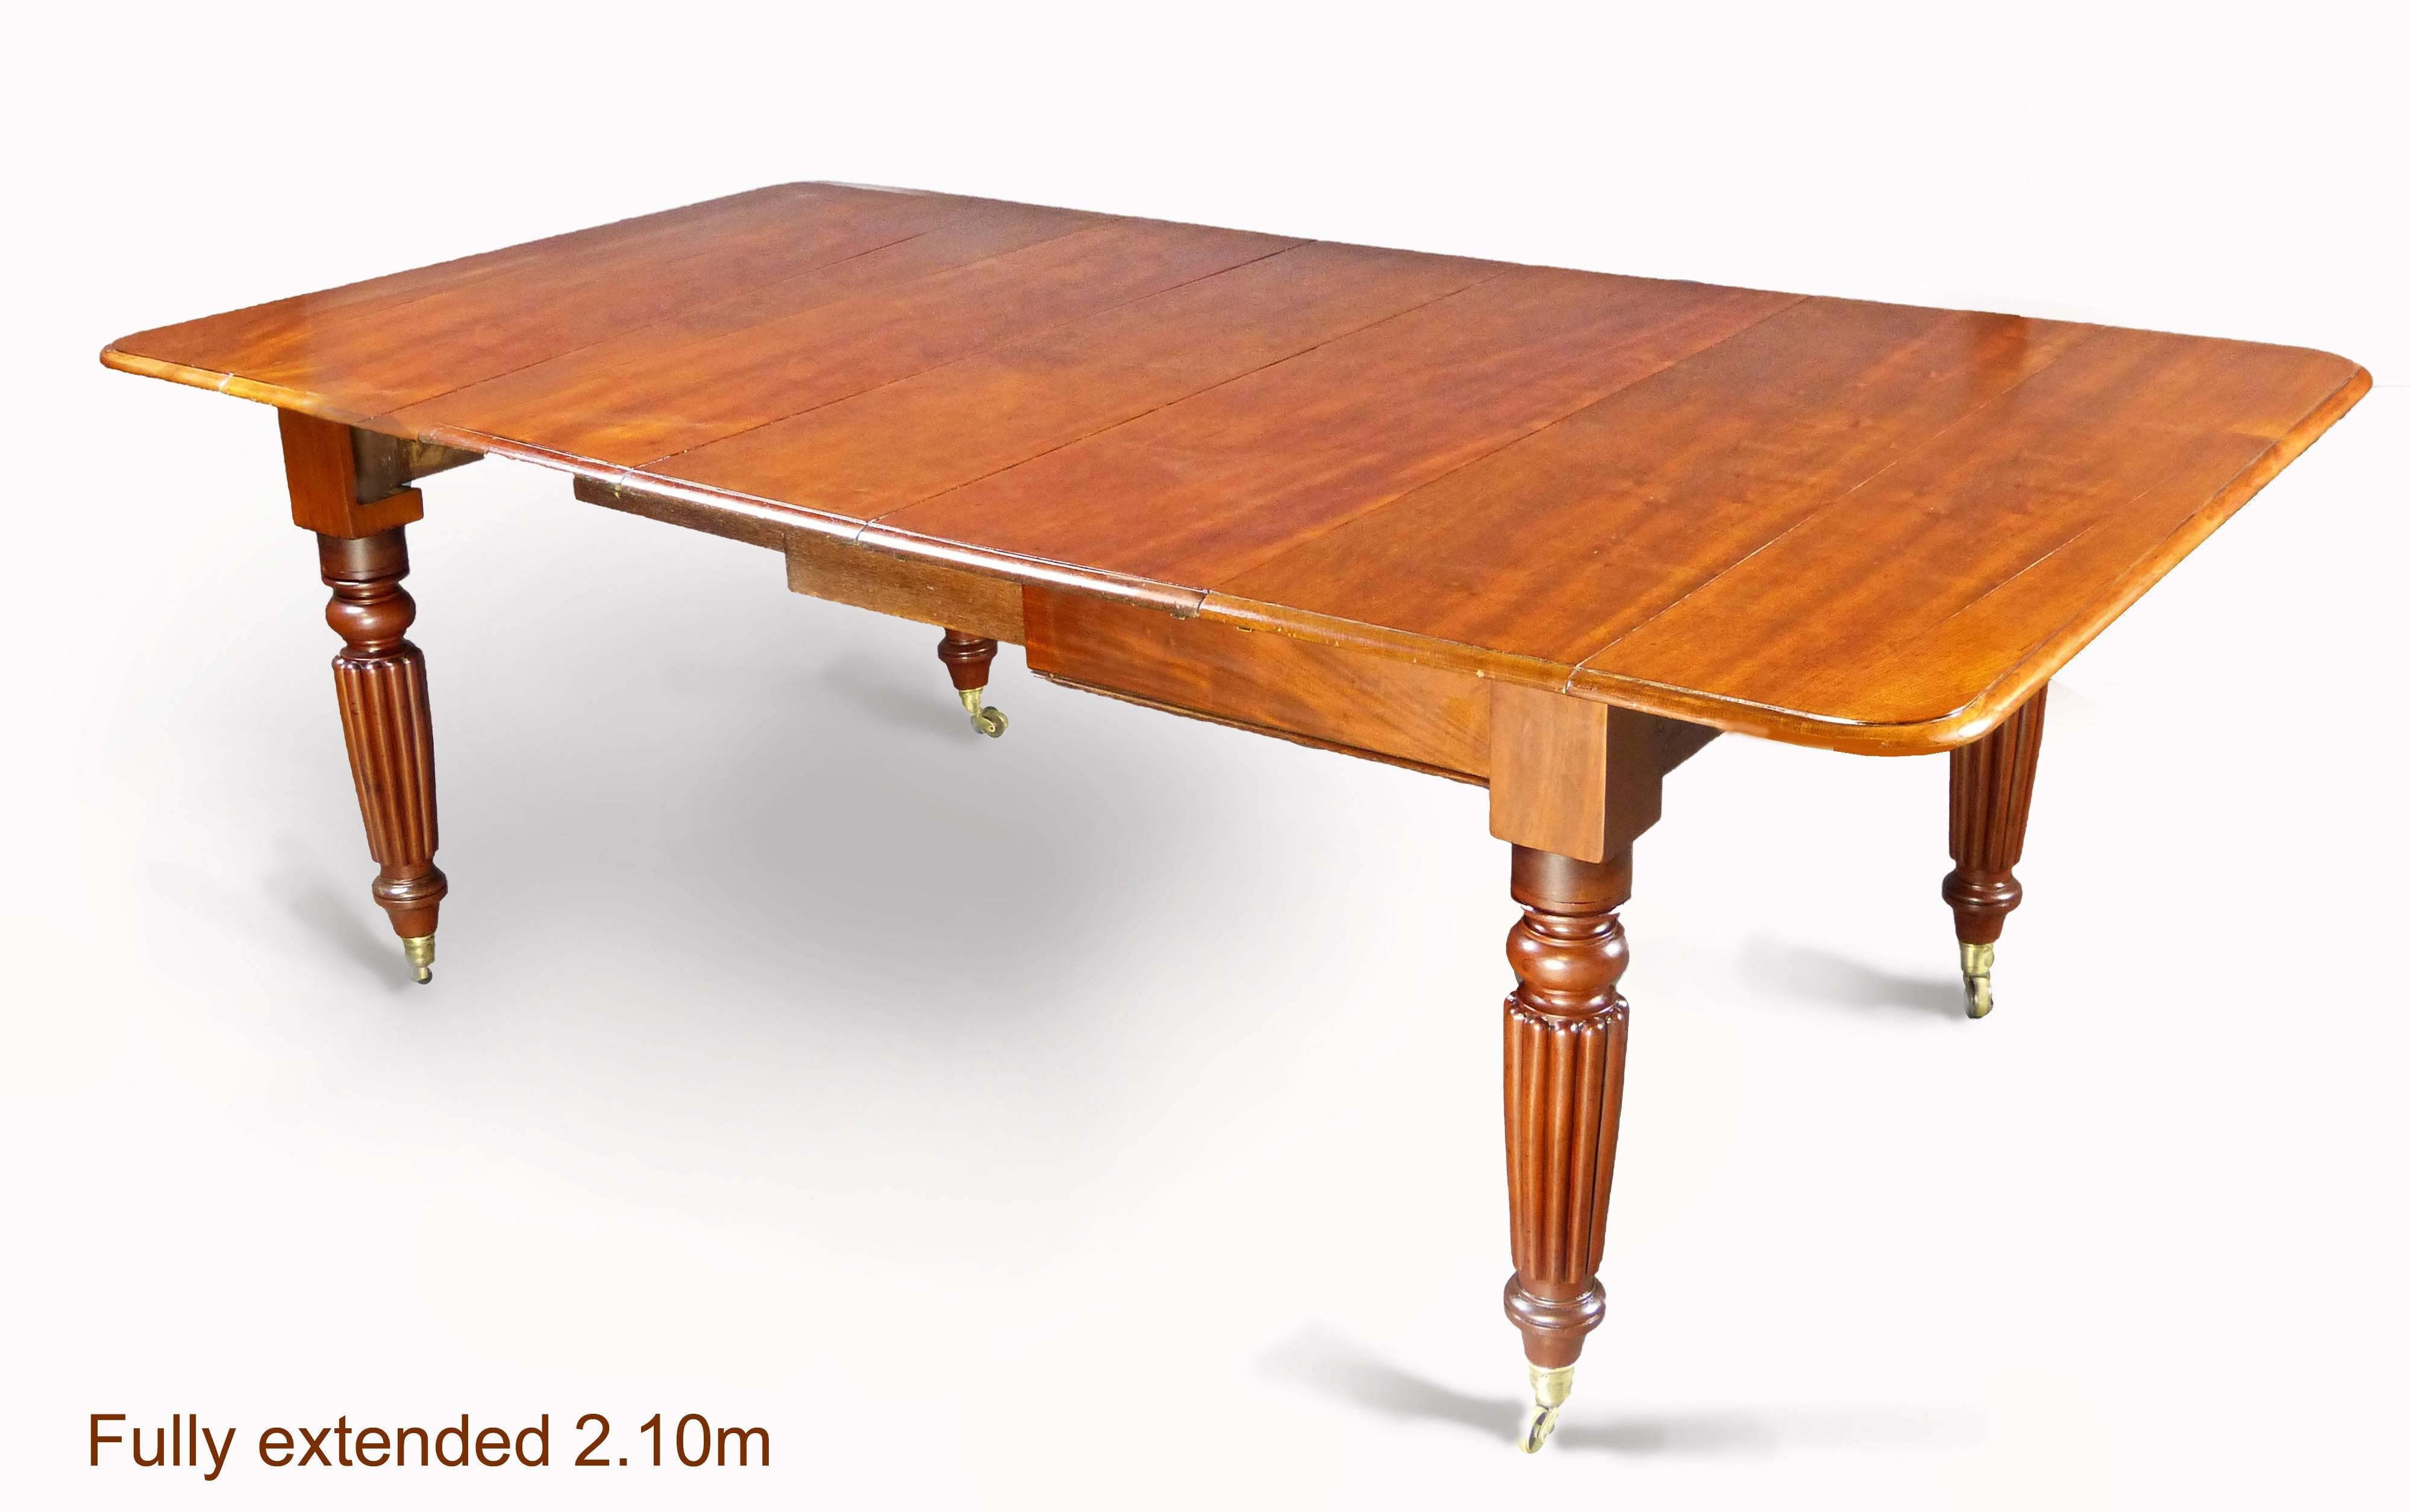 Mid-19th century solid mahogany English drop-leaf table extends to 210 cms with three extension leaves, of very robust construction with 4 beautifully turned and gadrooned tapering legs in the Gillows manner terminating in brass cup and wheel